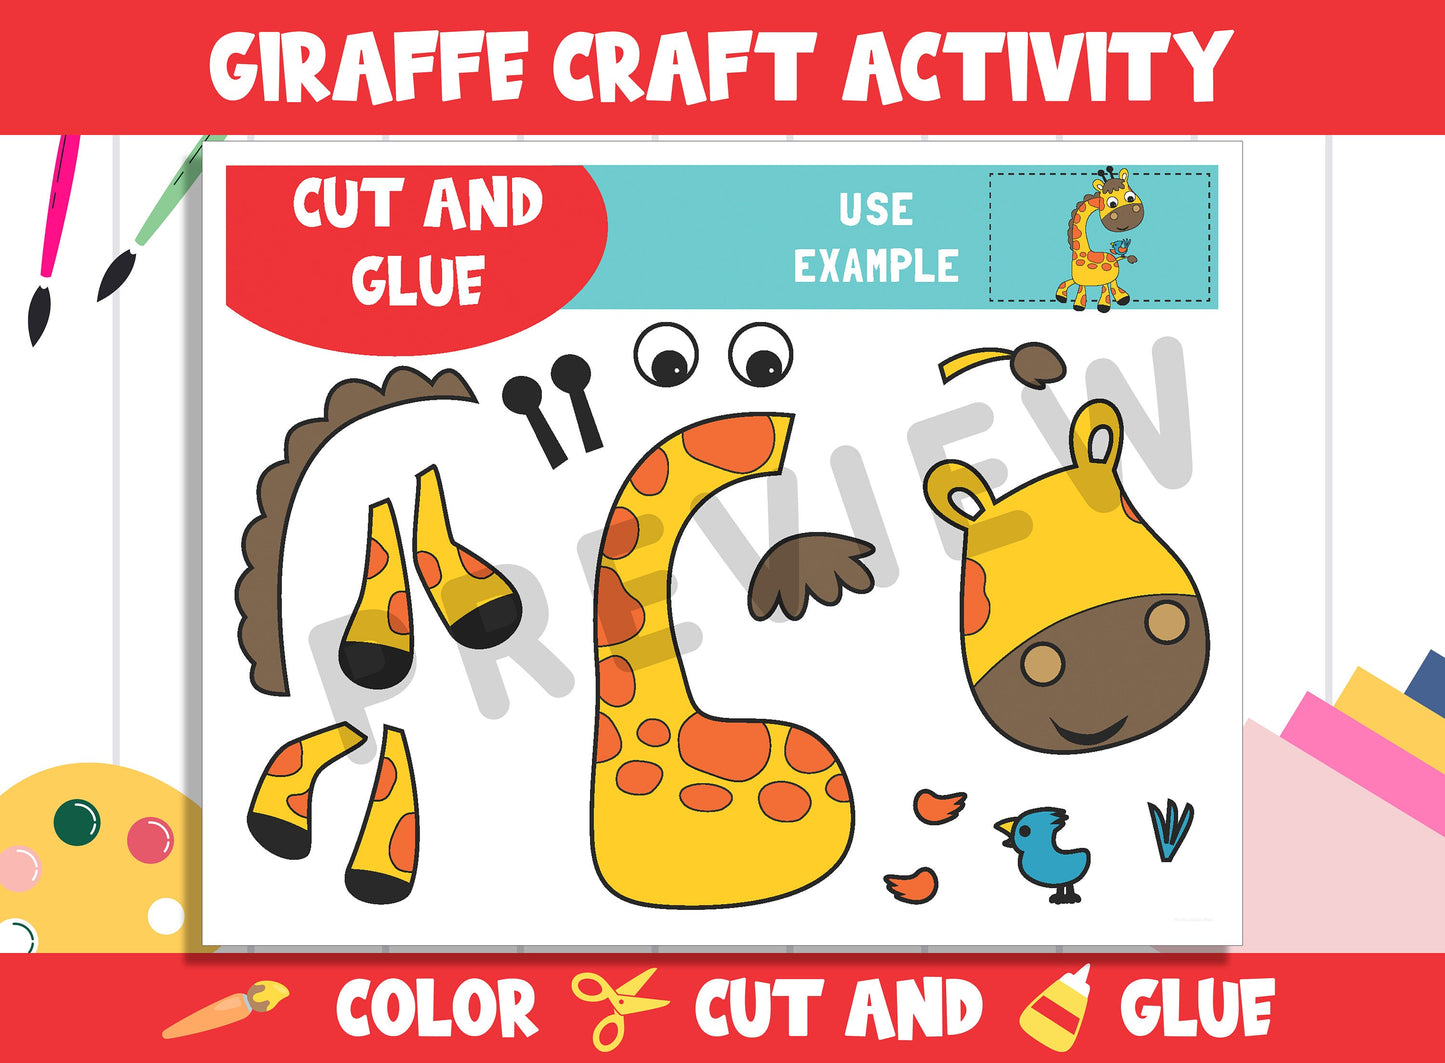 Cute Giraffe Craft Activity - Color, Cut, and Glue for PreK to 2nd Grade, PDF File, Instant Download